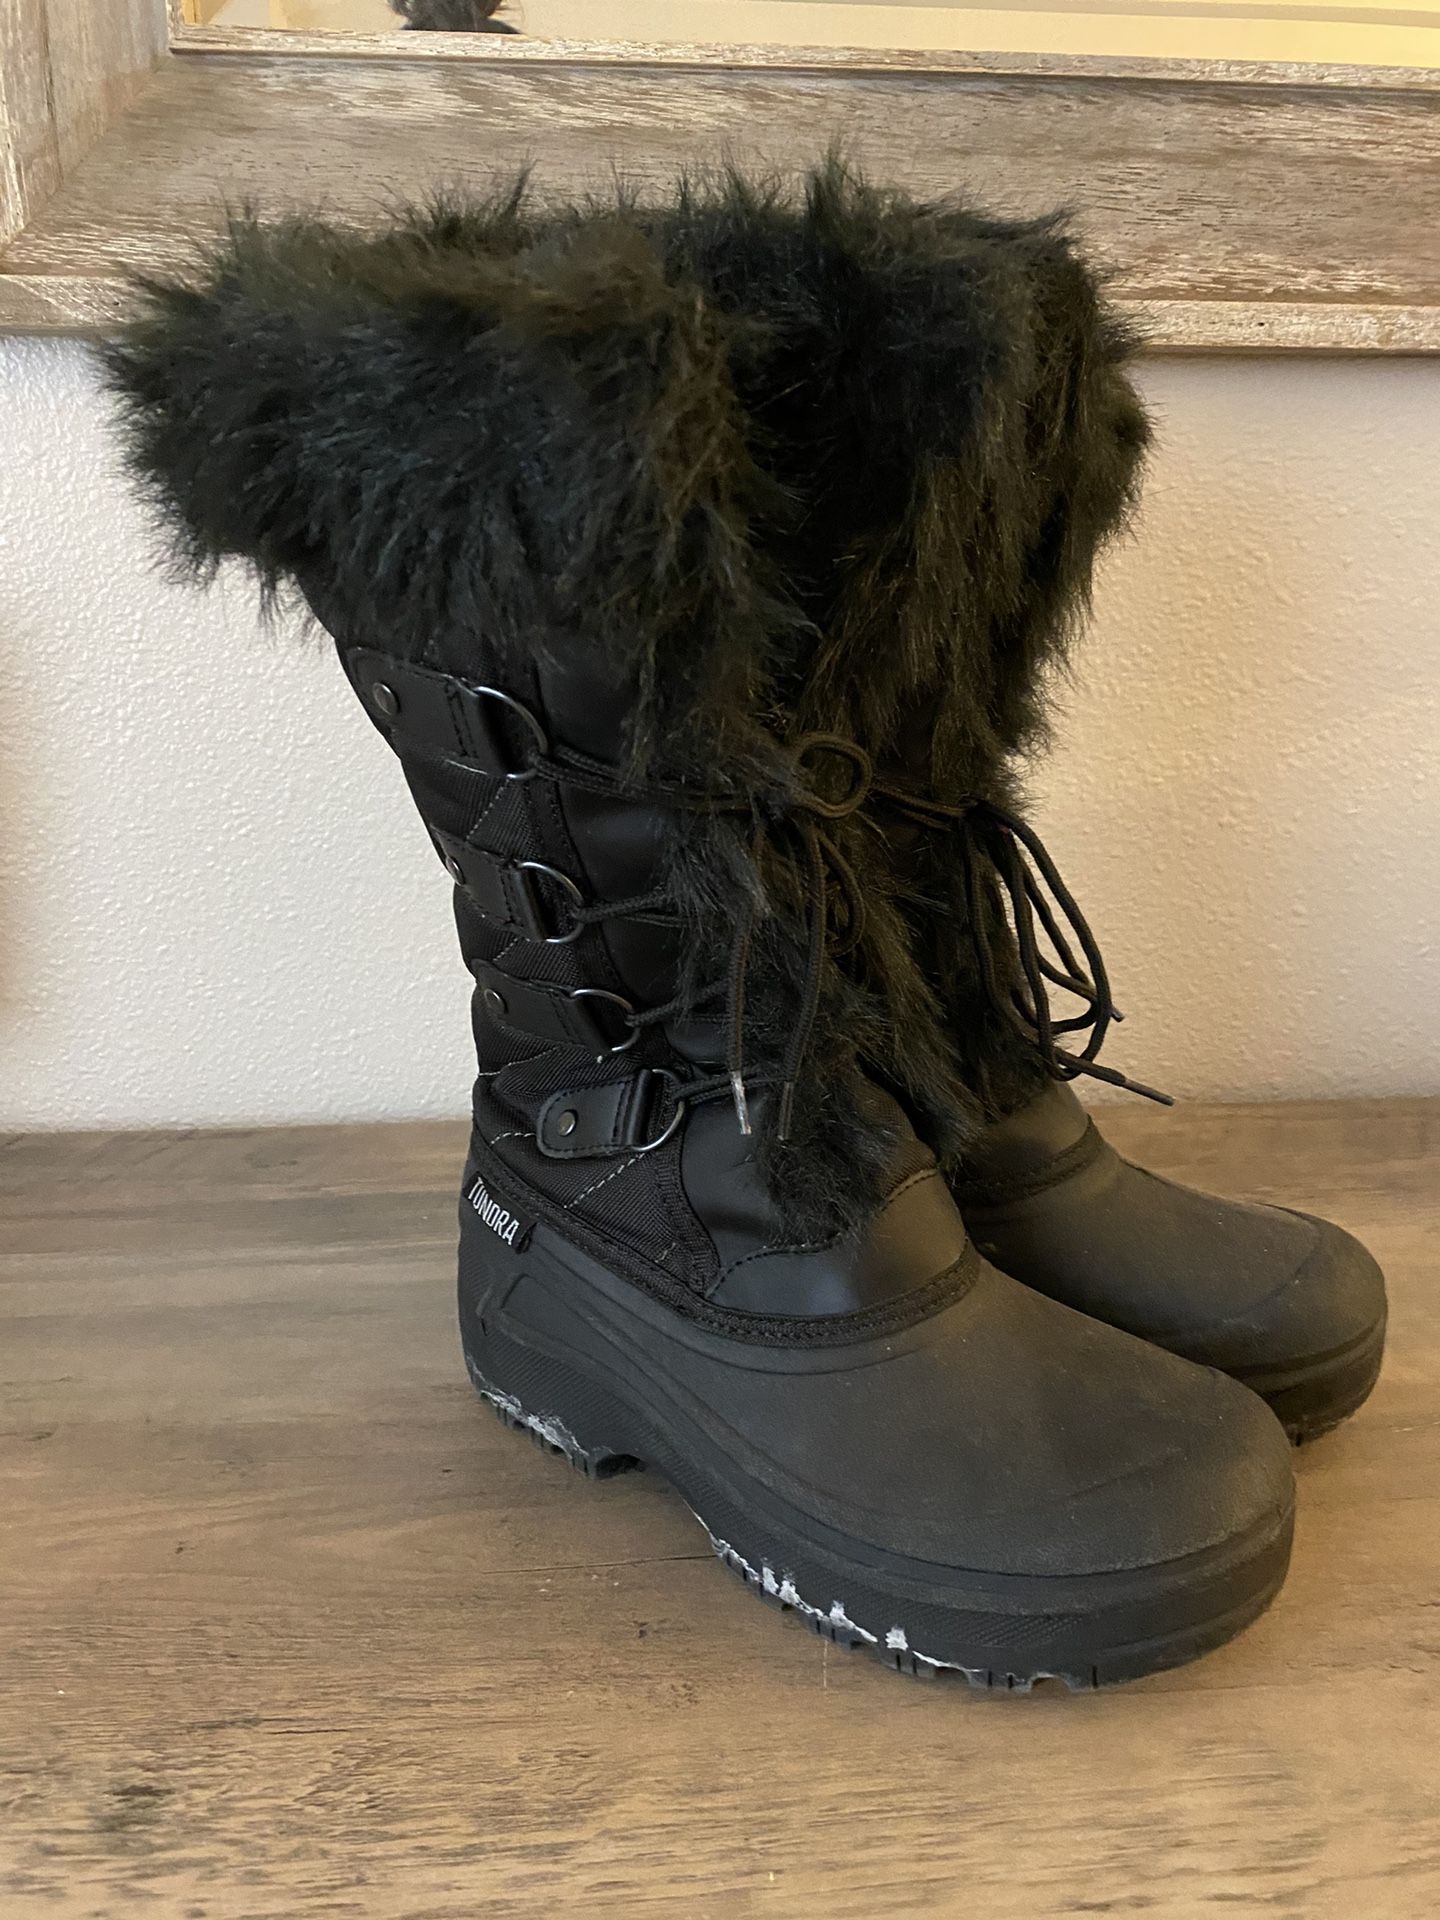 Women’s Snow Boots (Size 6) In Great Condition!